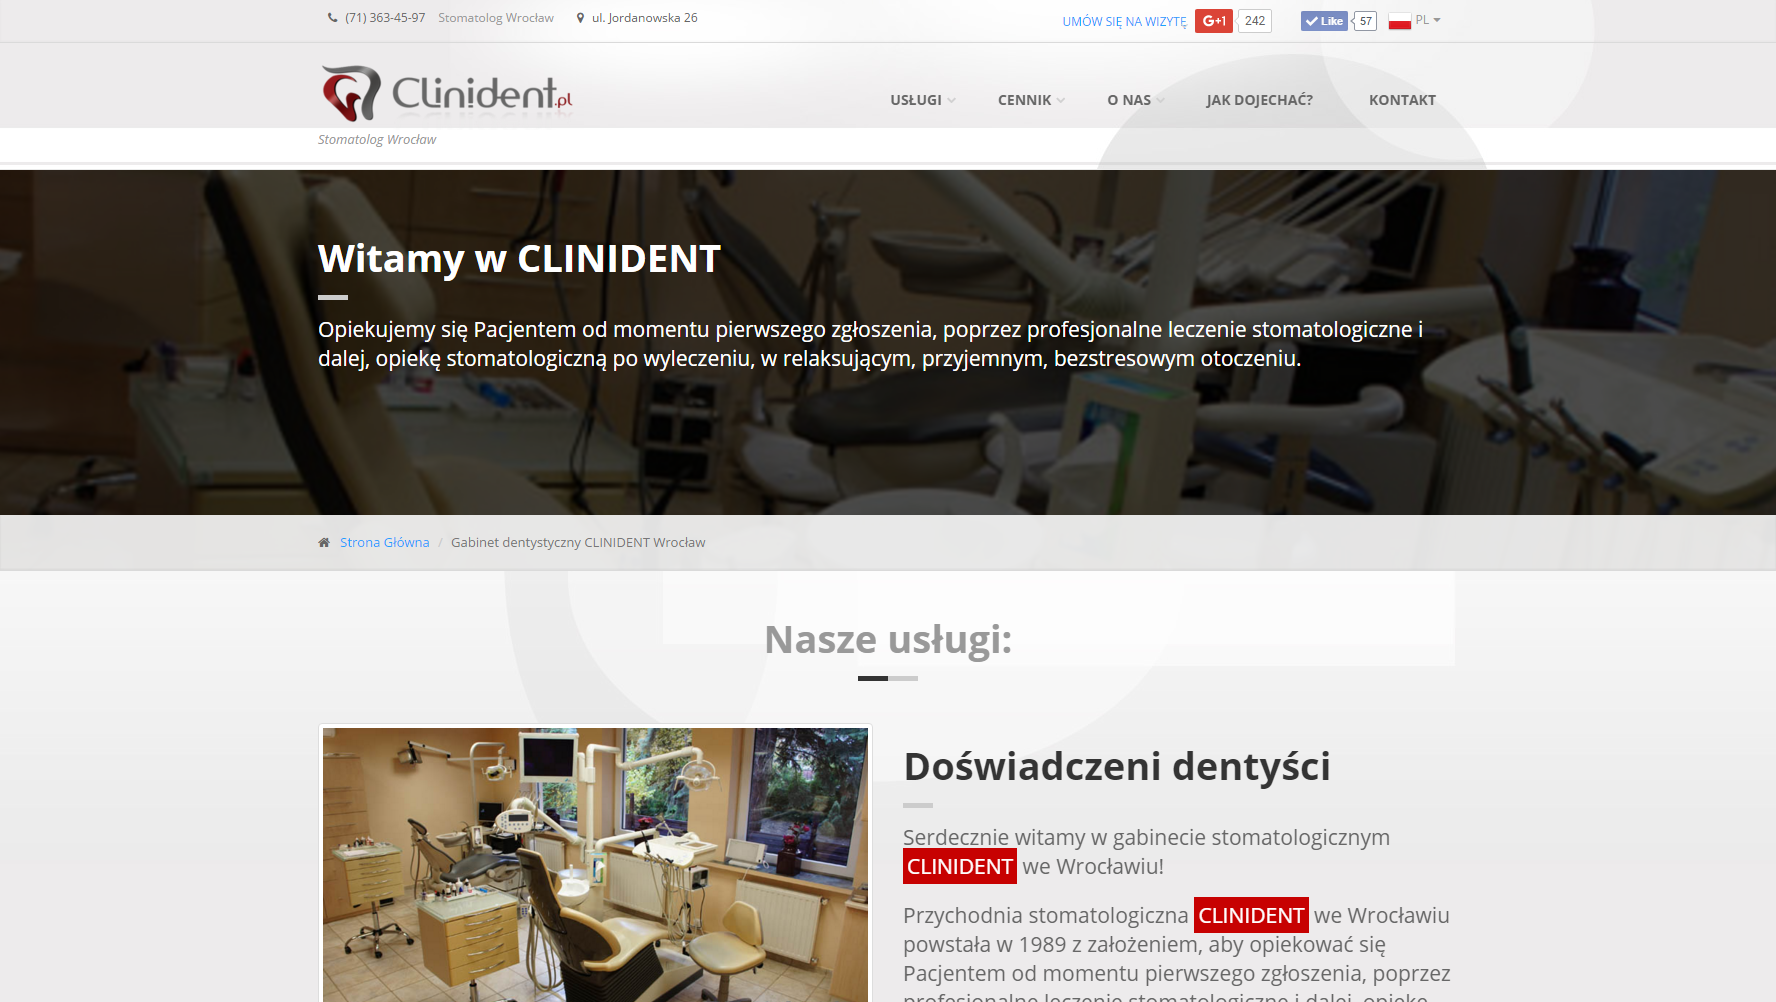 Proyecto Clinident.pl